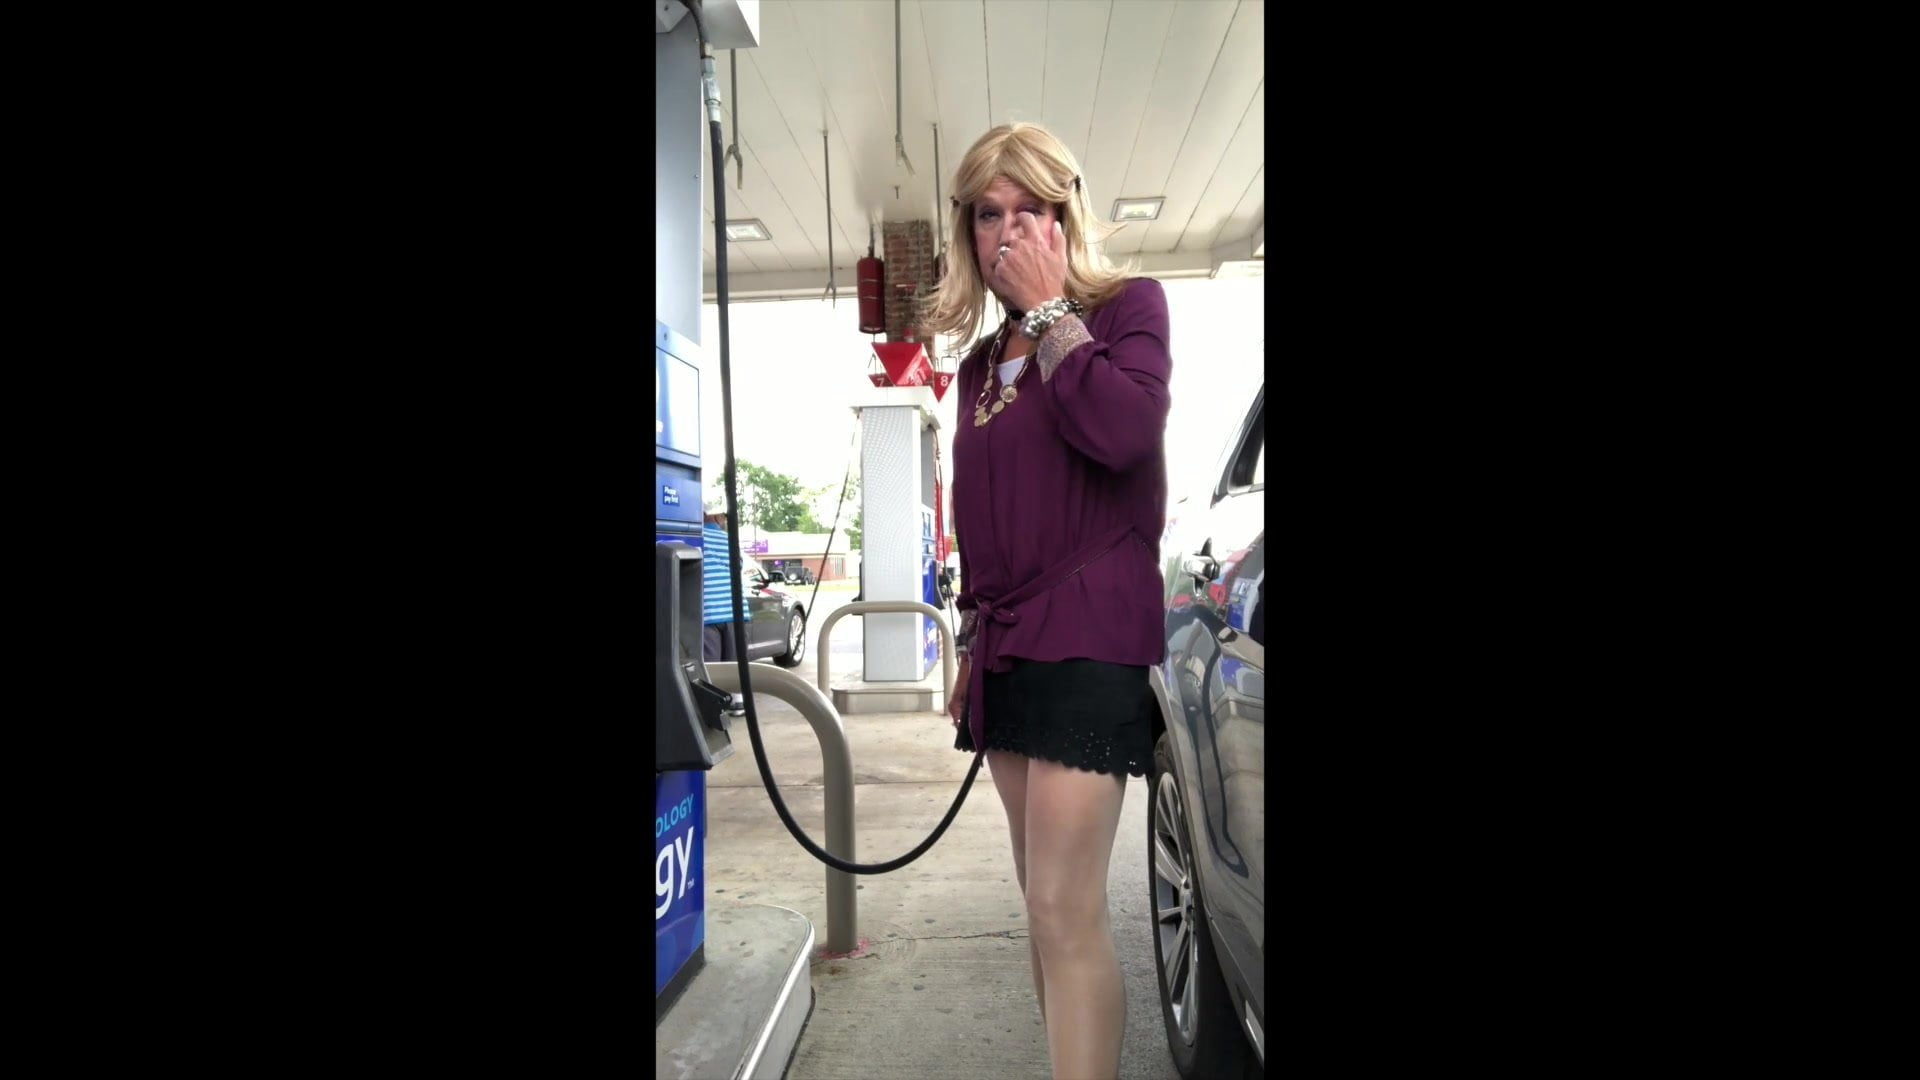 Gas station in Purple top and pantyhose